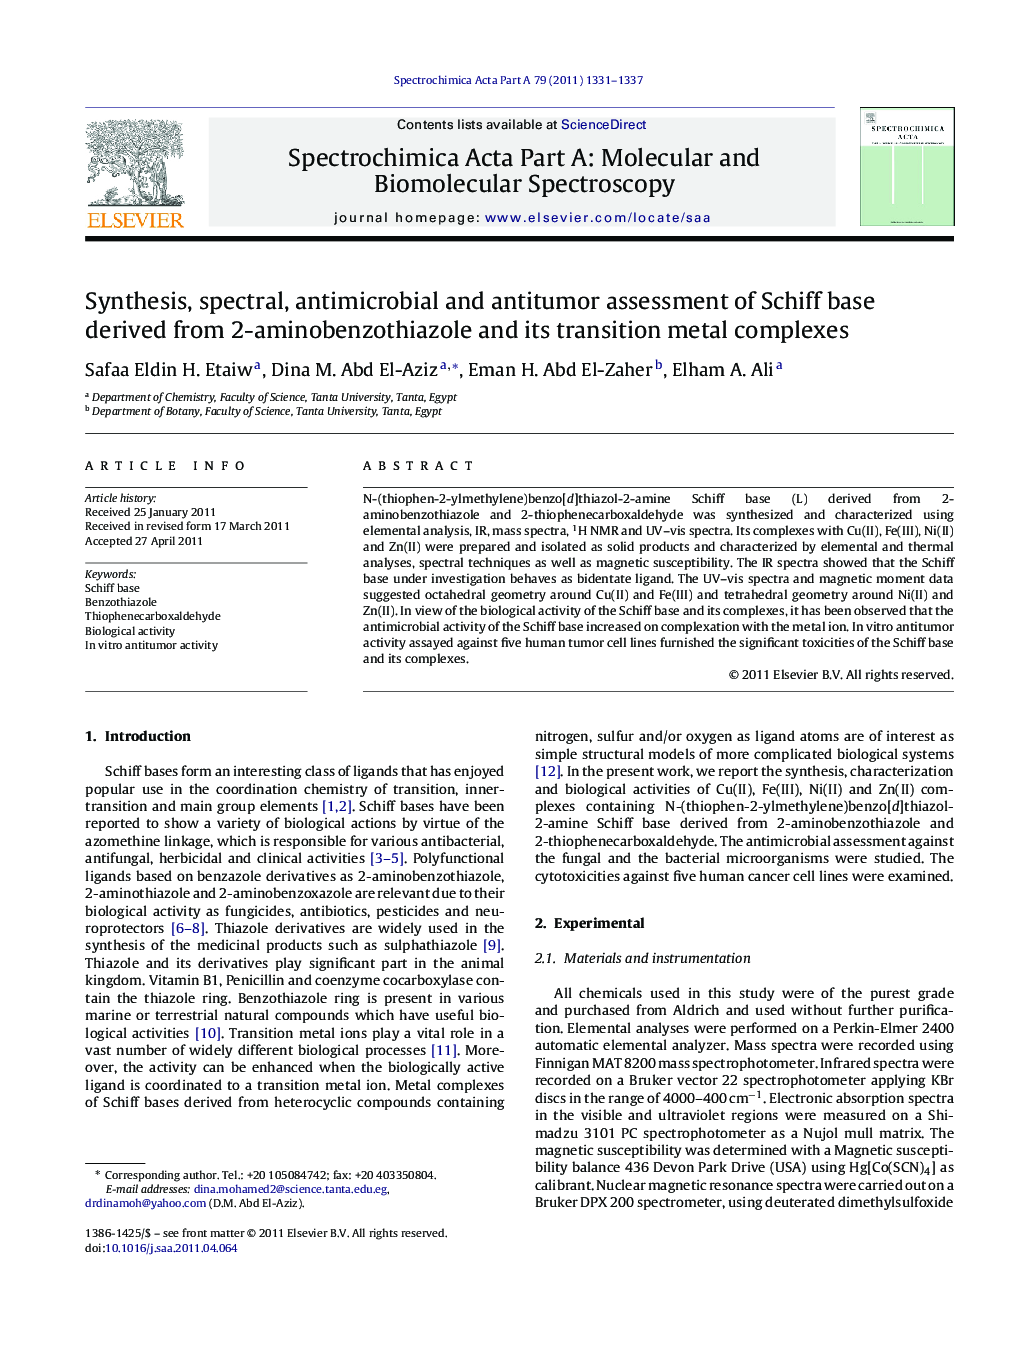 Synthesis, spectral, antimicrobial and antitumor assessment of Schiff base derived from 2-aminobenzothiazole and its transition metal complexes